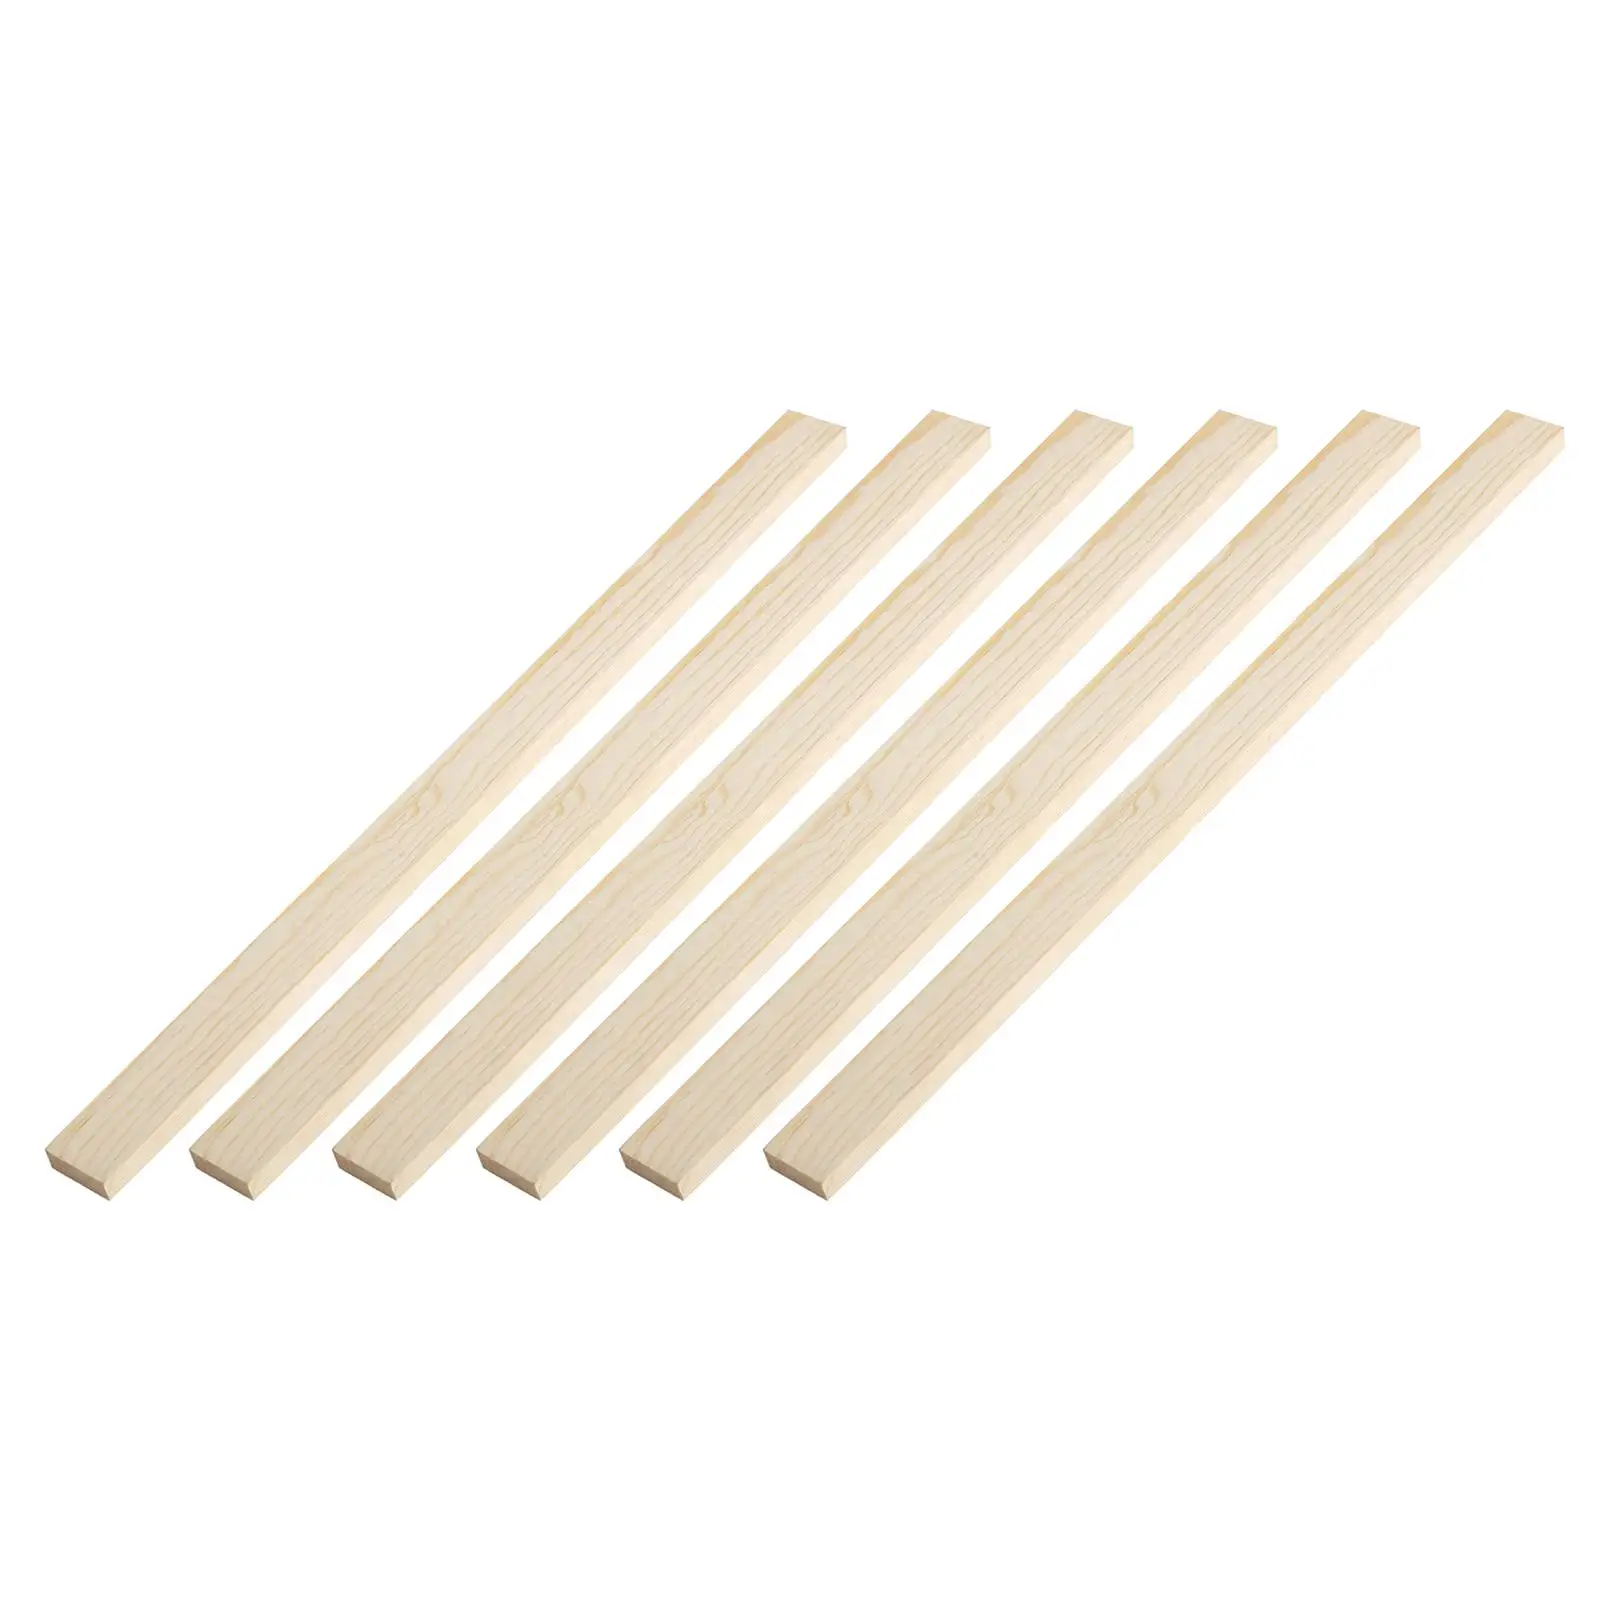 6Pcs Length 40cm Wooden Rolling Pin Guides Measuring Dough Strips for Dough Thickness